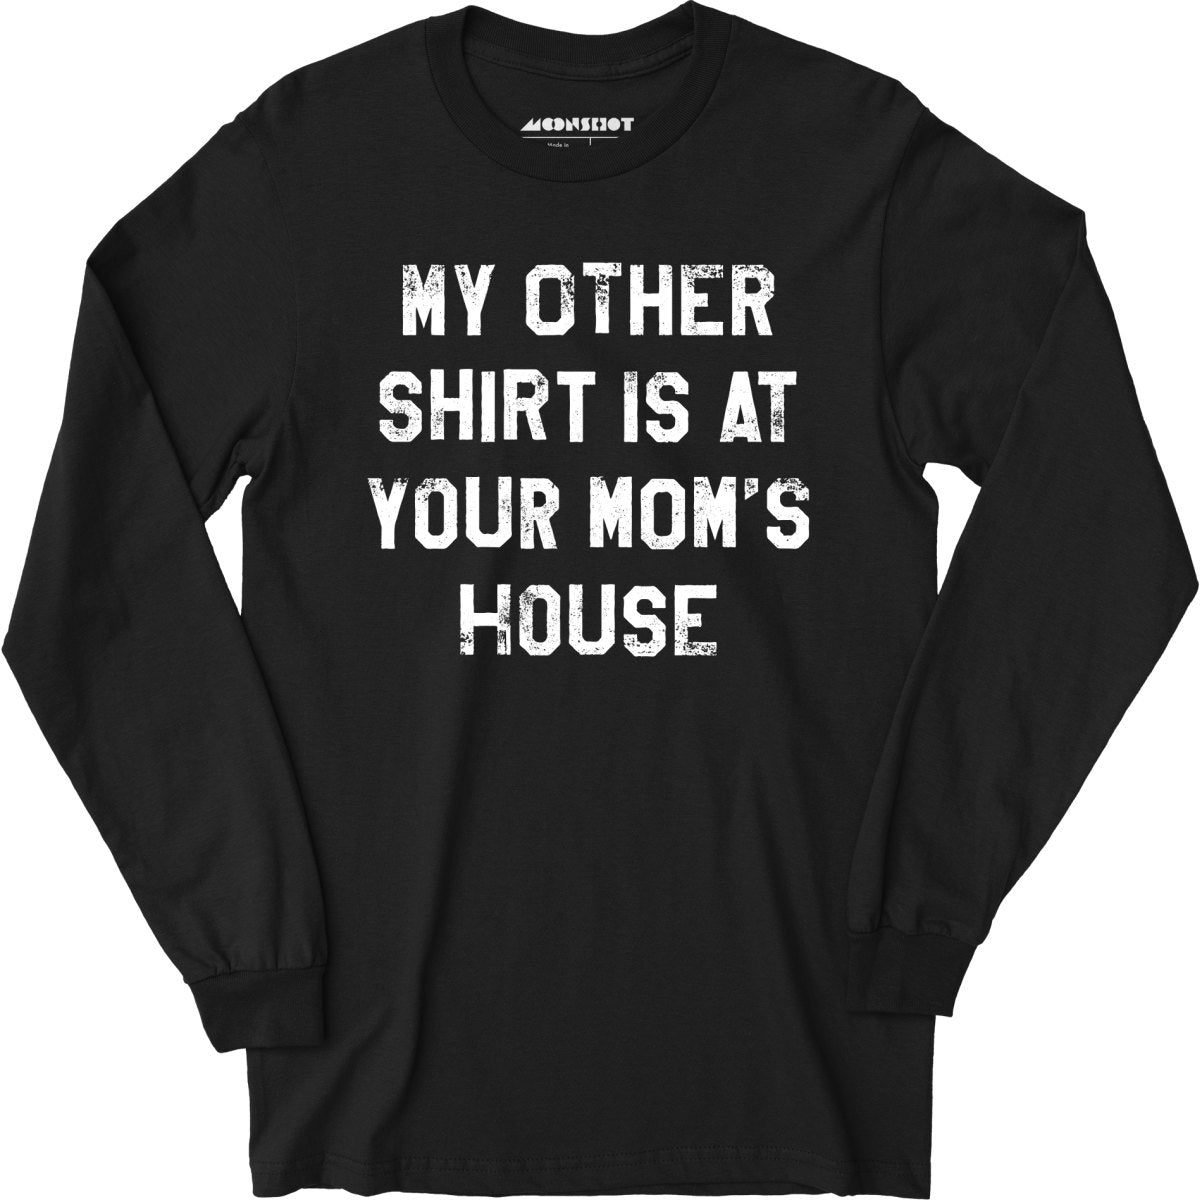 My Other Shirt Is At Your Mom's House - Long Sleeve T-Shirt